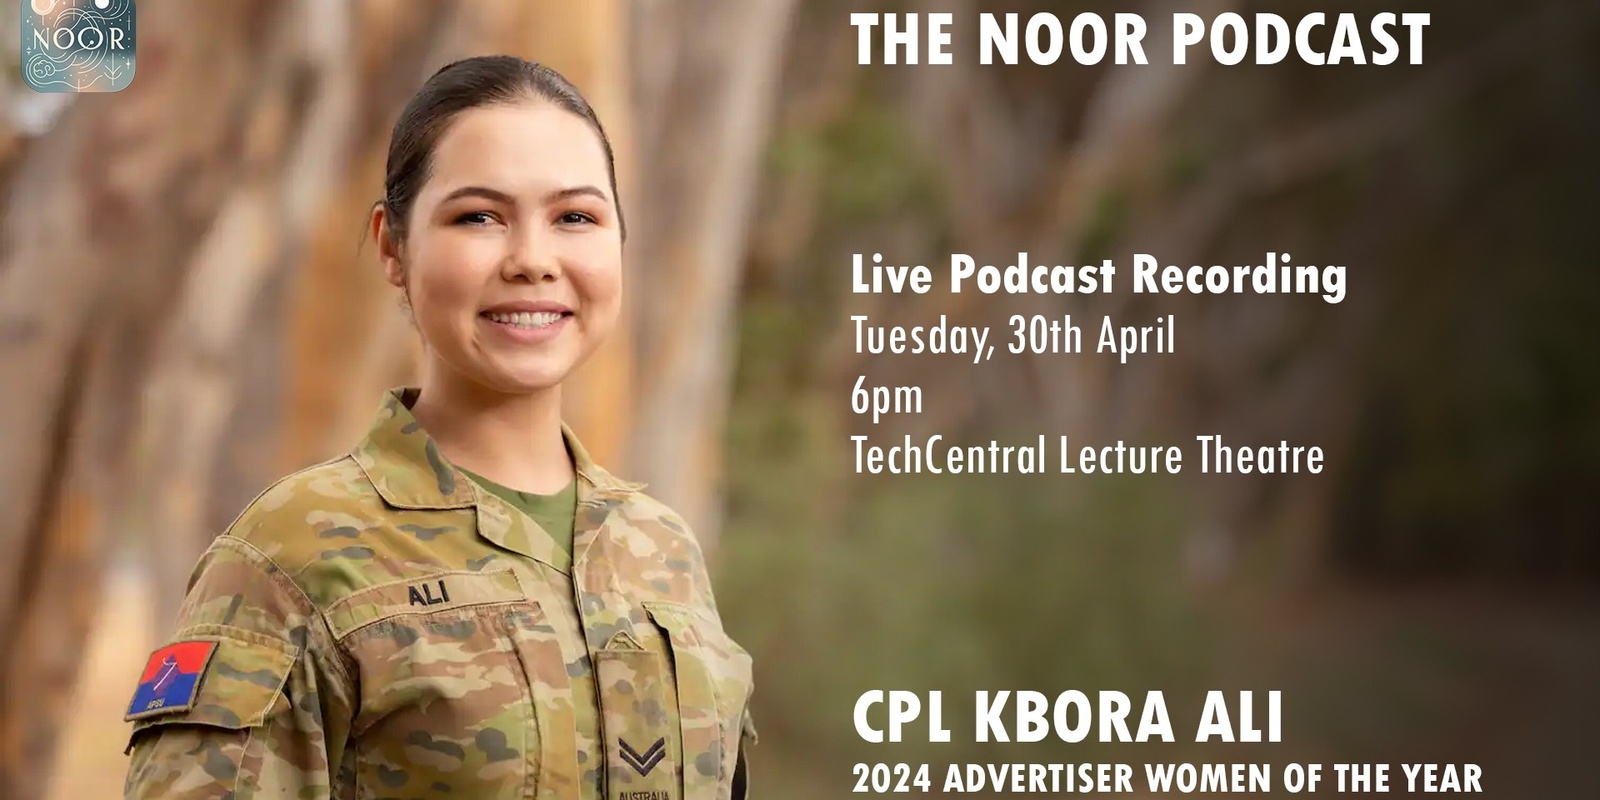 Banner image for The Noor Podcast Live Recording and Q&A | Cpl Kbora Ali | 2024 Advertiser Women of the Year